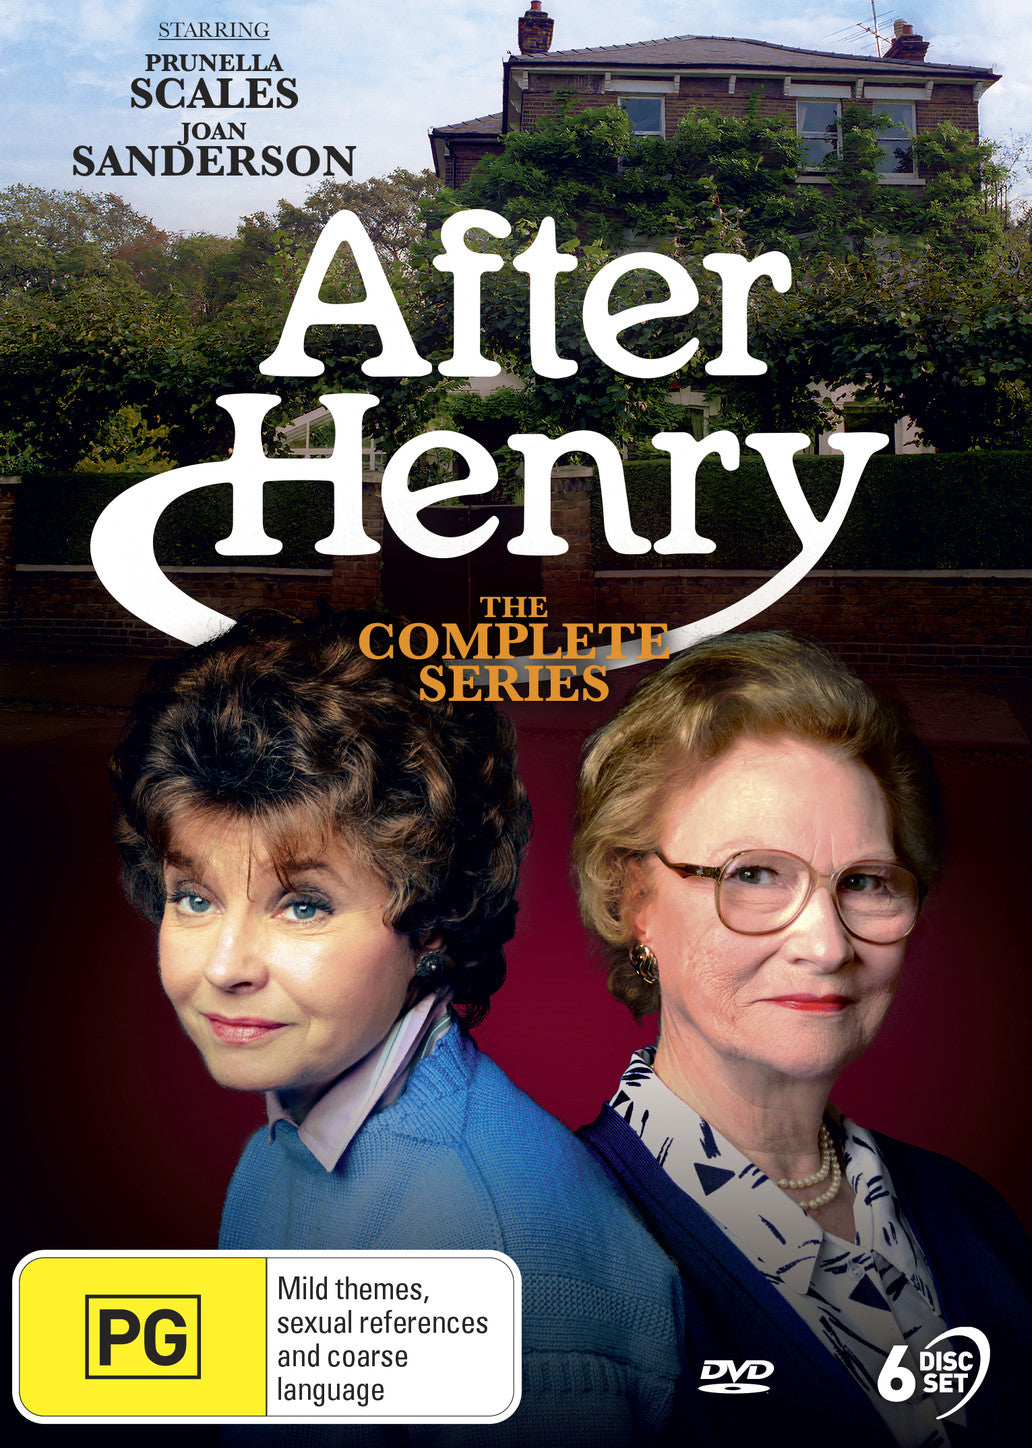 AFTER HENRY: THE COMPLETE SERIES